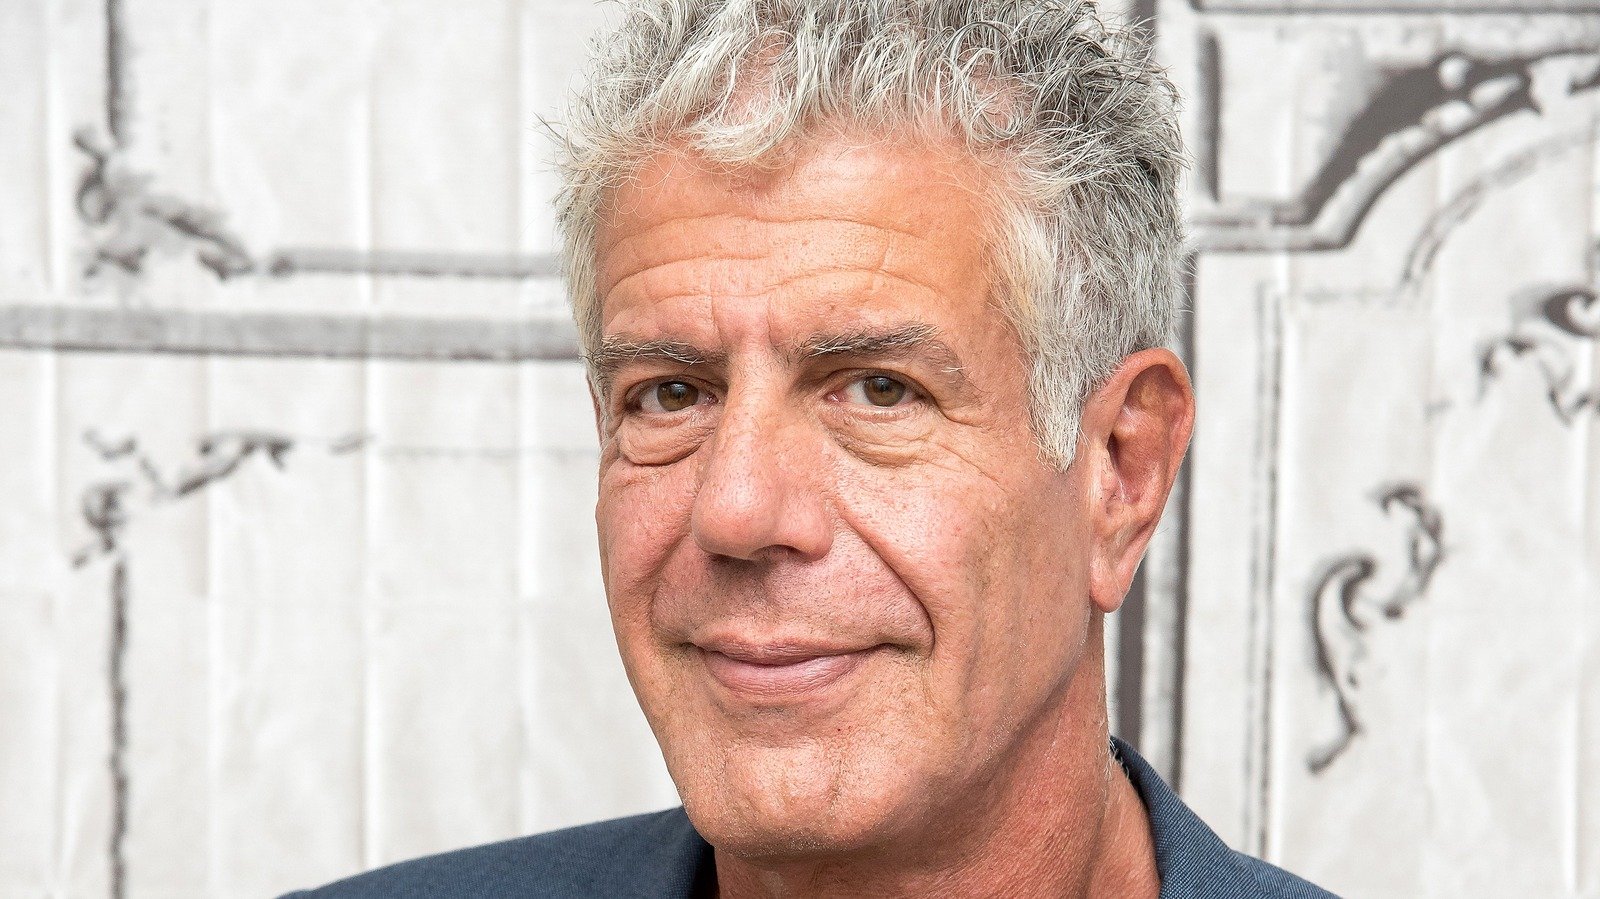 The Sandwich Anthony Bourdain Craved Most While Traveling Abroad